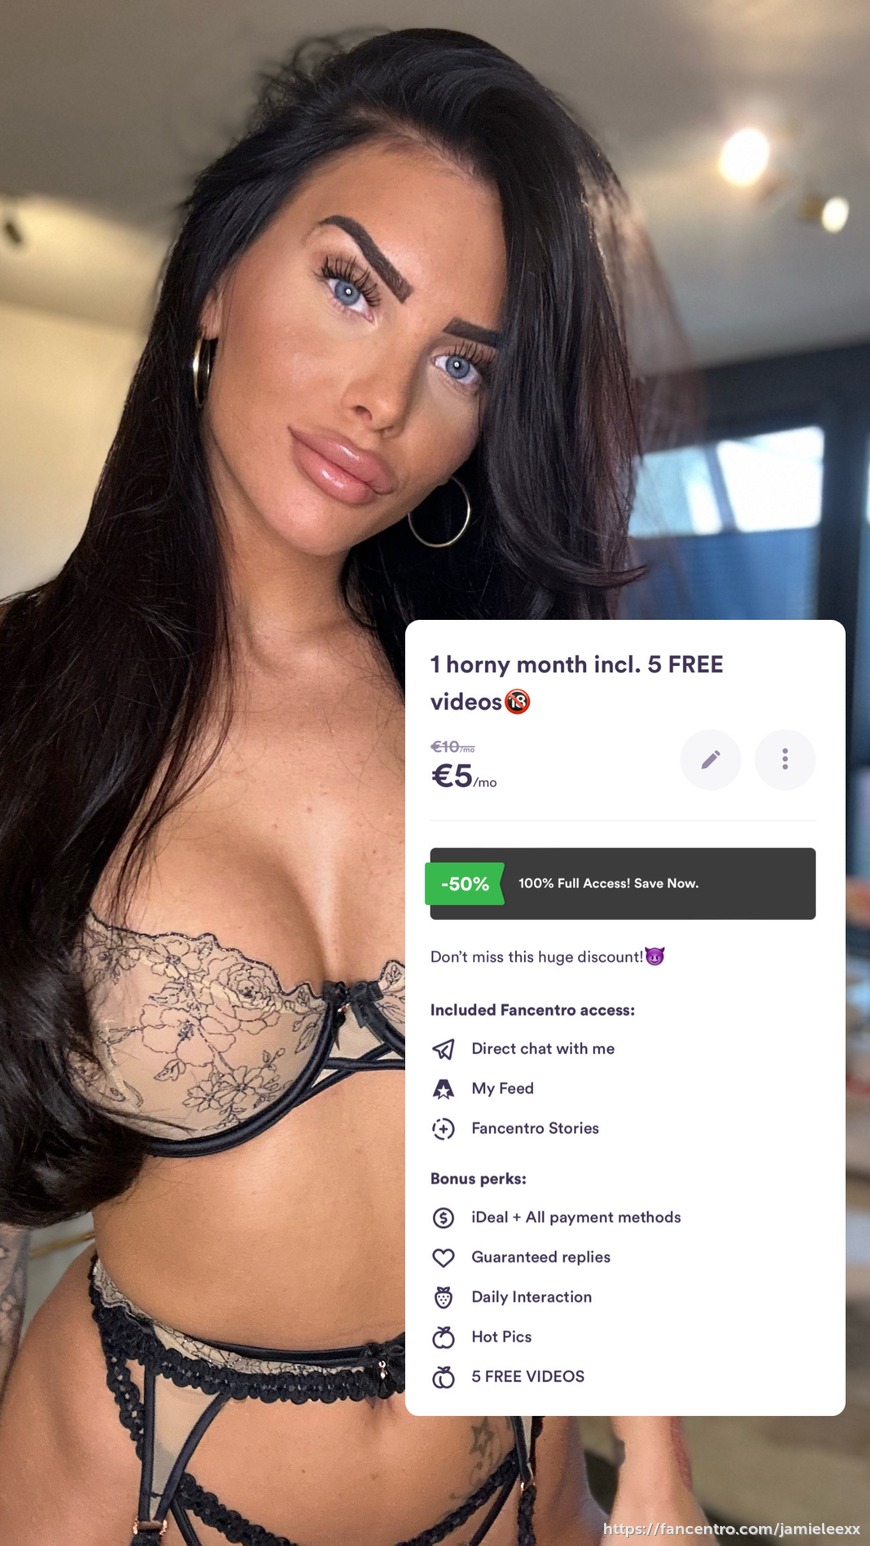 Only till tommorow! €5 incl 5 videos👇🏽